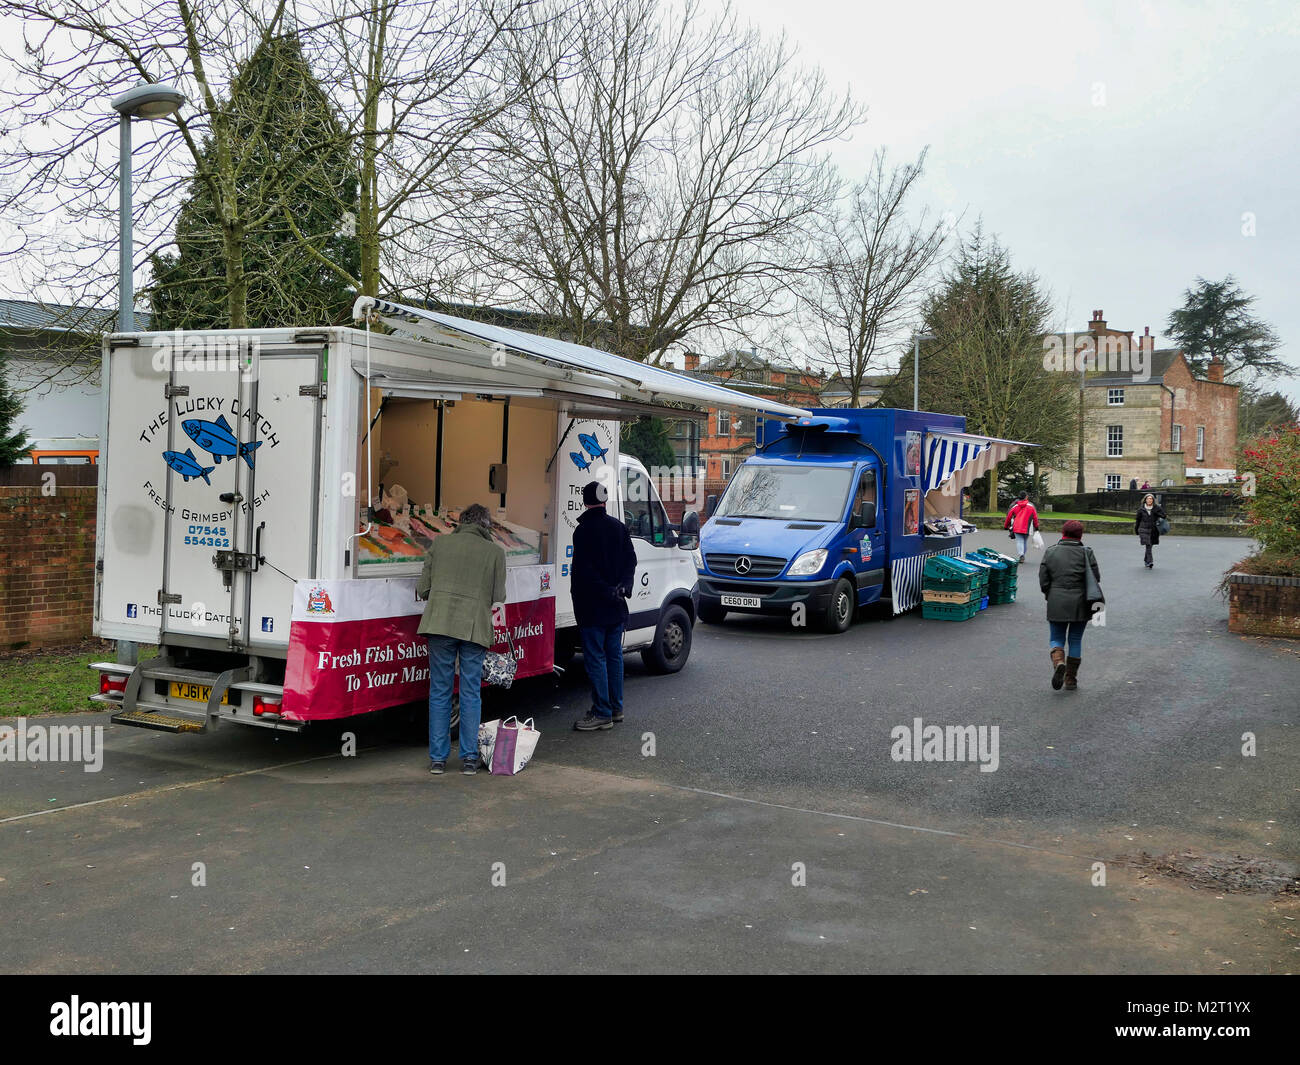 Ashbourne, UK. 8th February, 2018. Only two vendors attend the struggling Ashbourne, Derbyshire Thursday market after the Town Council decide to cut costs by not providing stalls for market traders. Ashbourne is the gateway to the Peak District National Park close to the Dovedale valley. Credit: Doug Blane/Alamy Live News Stock Photo